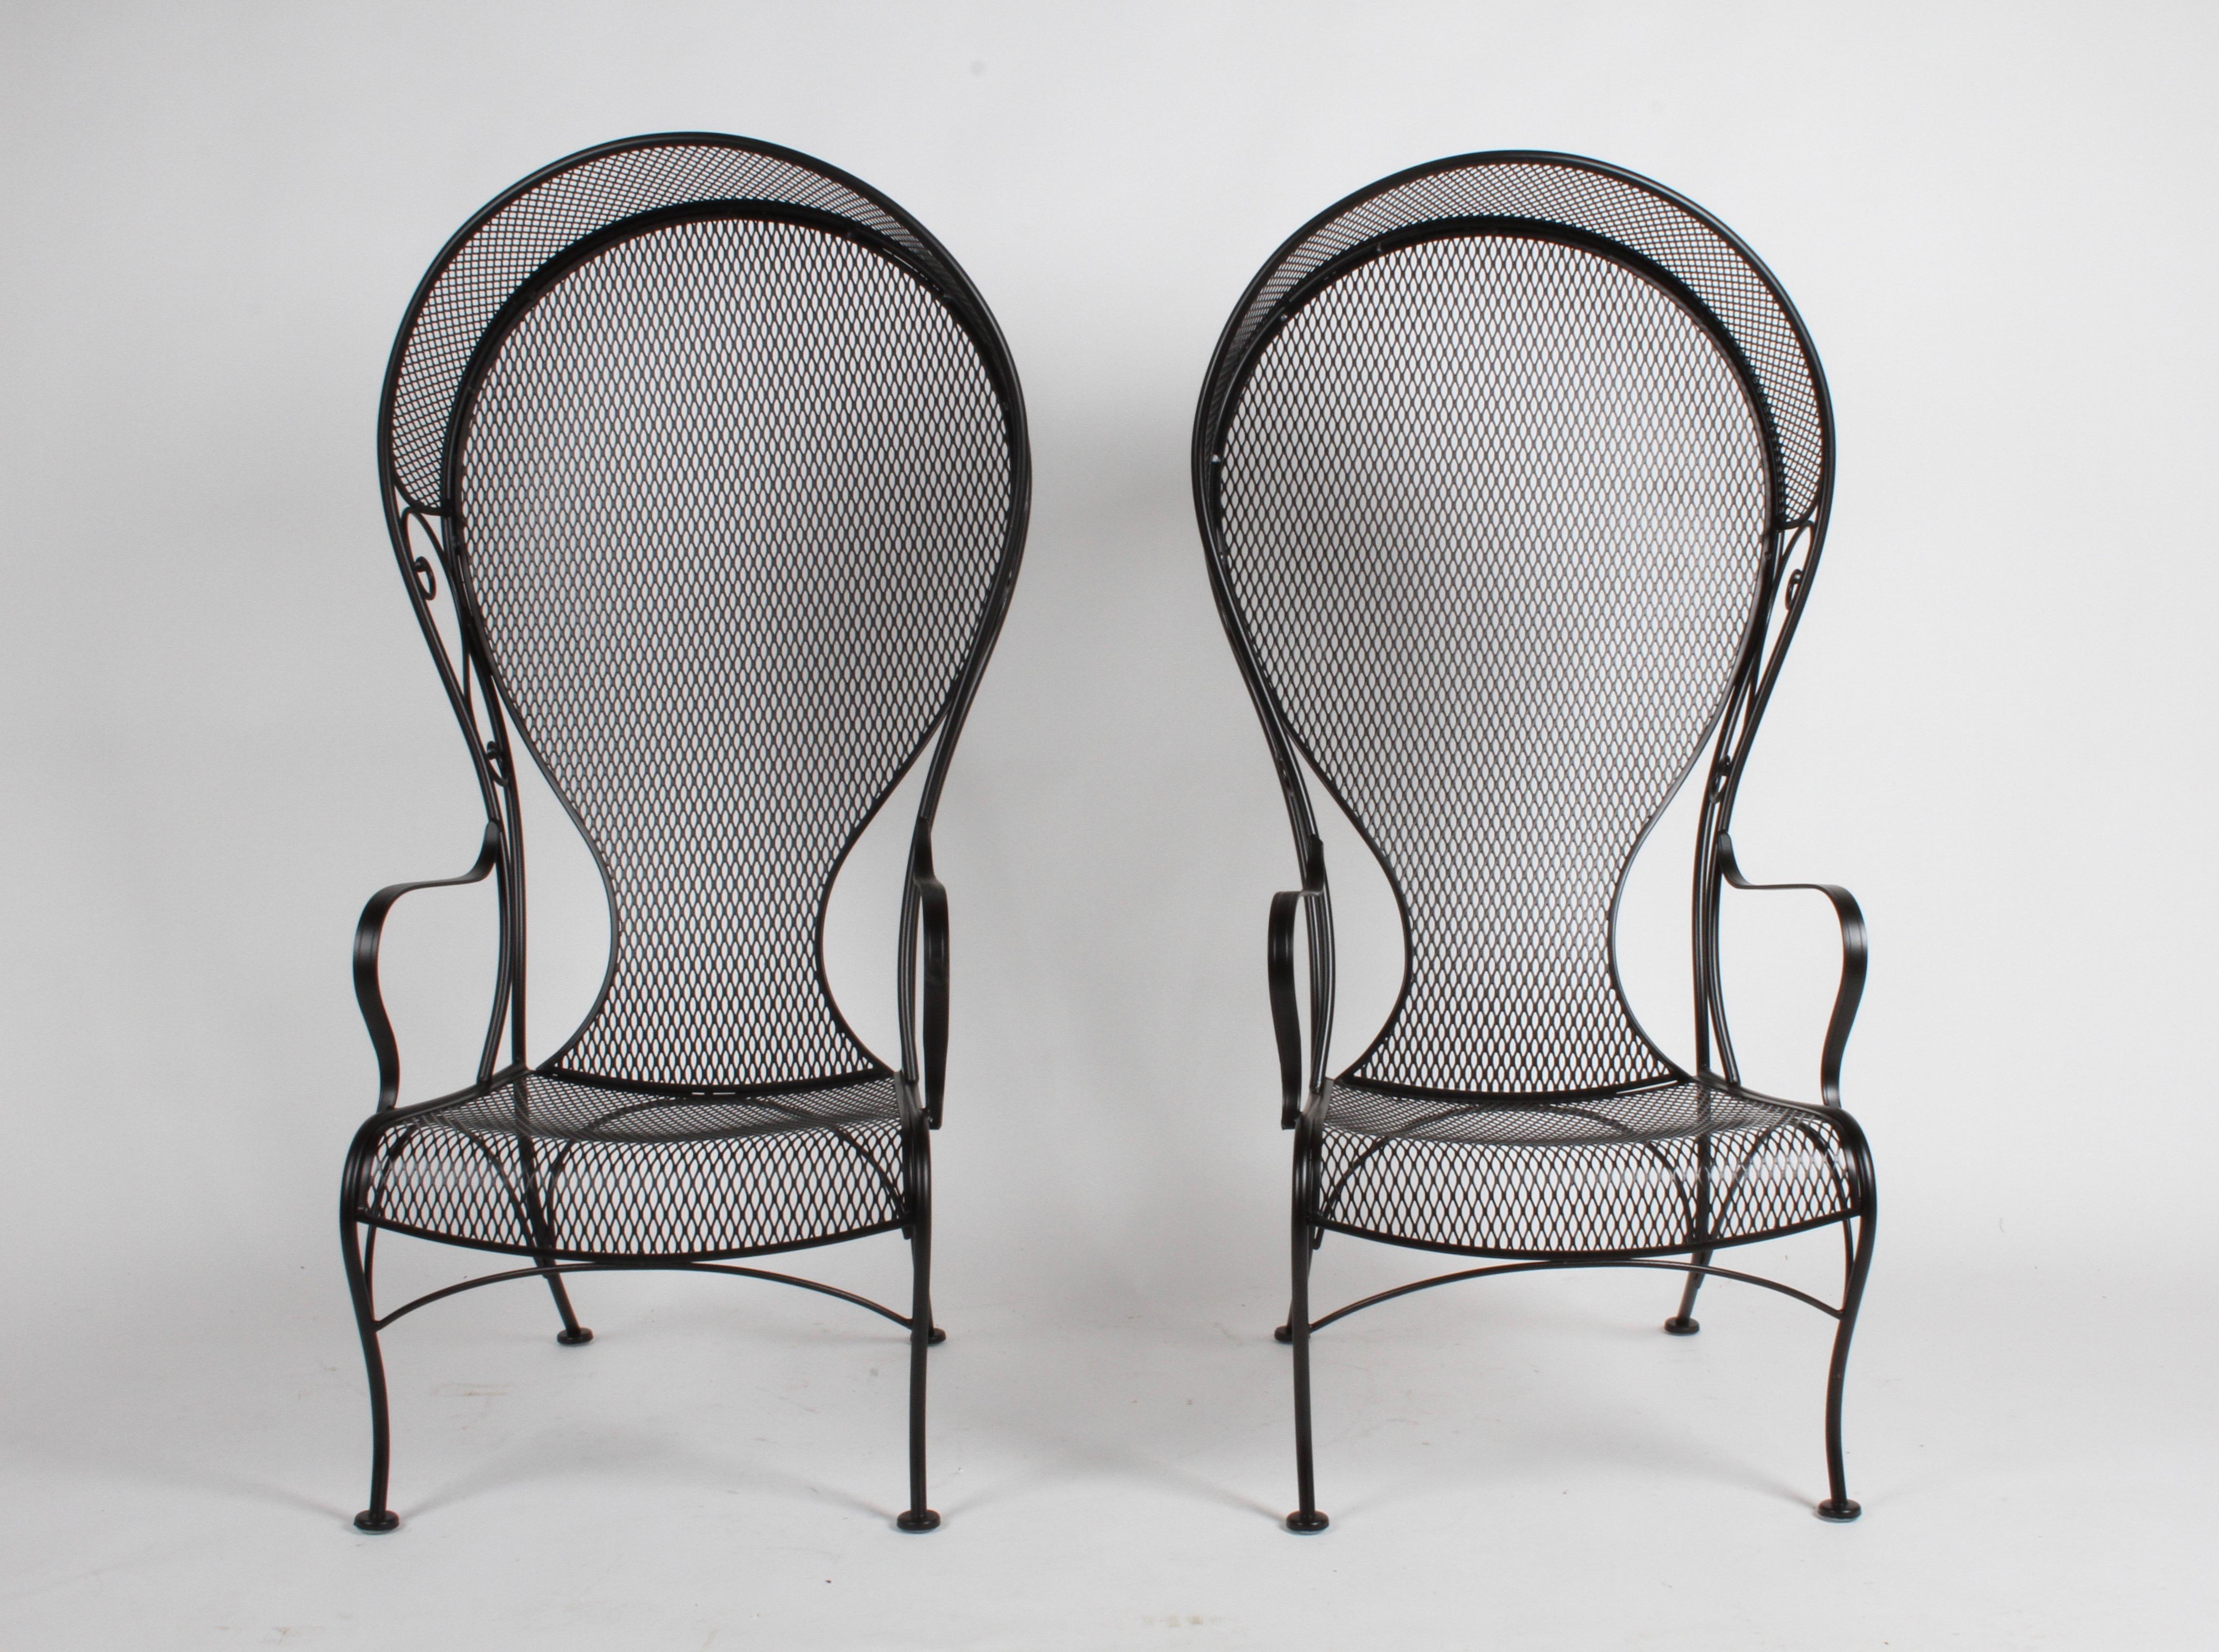 A rare set of Mid-Century Modern Russell Woodard wrought iron high back canopy patio lounge chairs with corseted backs, also know as the Princess chair in satin black. These chairs have been blasted, dipped in rust prohibitor and painted in stain